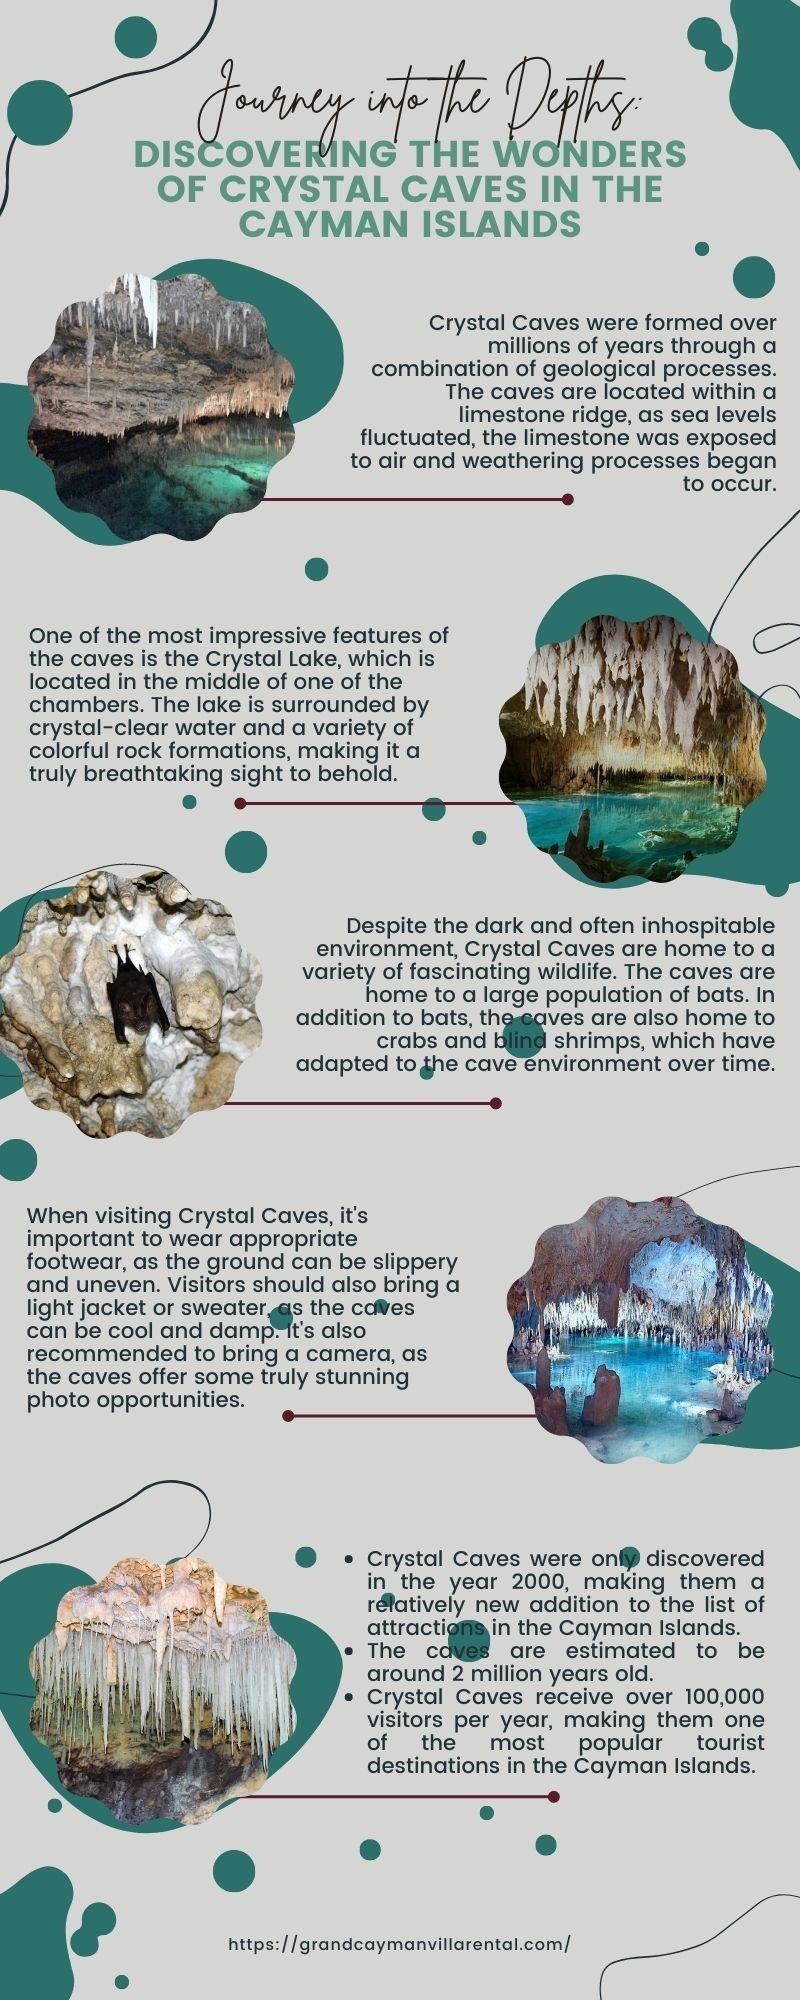 Journey into the Depths: Discovering the Wonders of Crystal Caves in the Cayman Islands